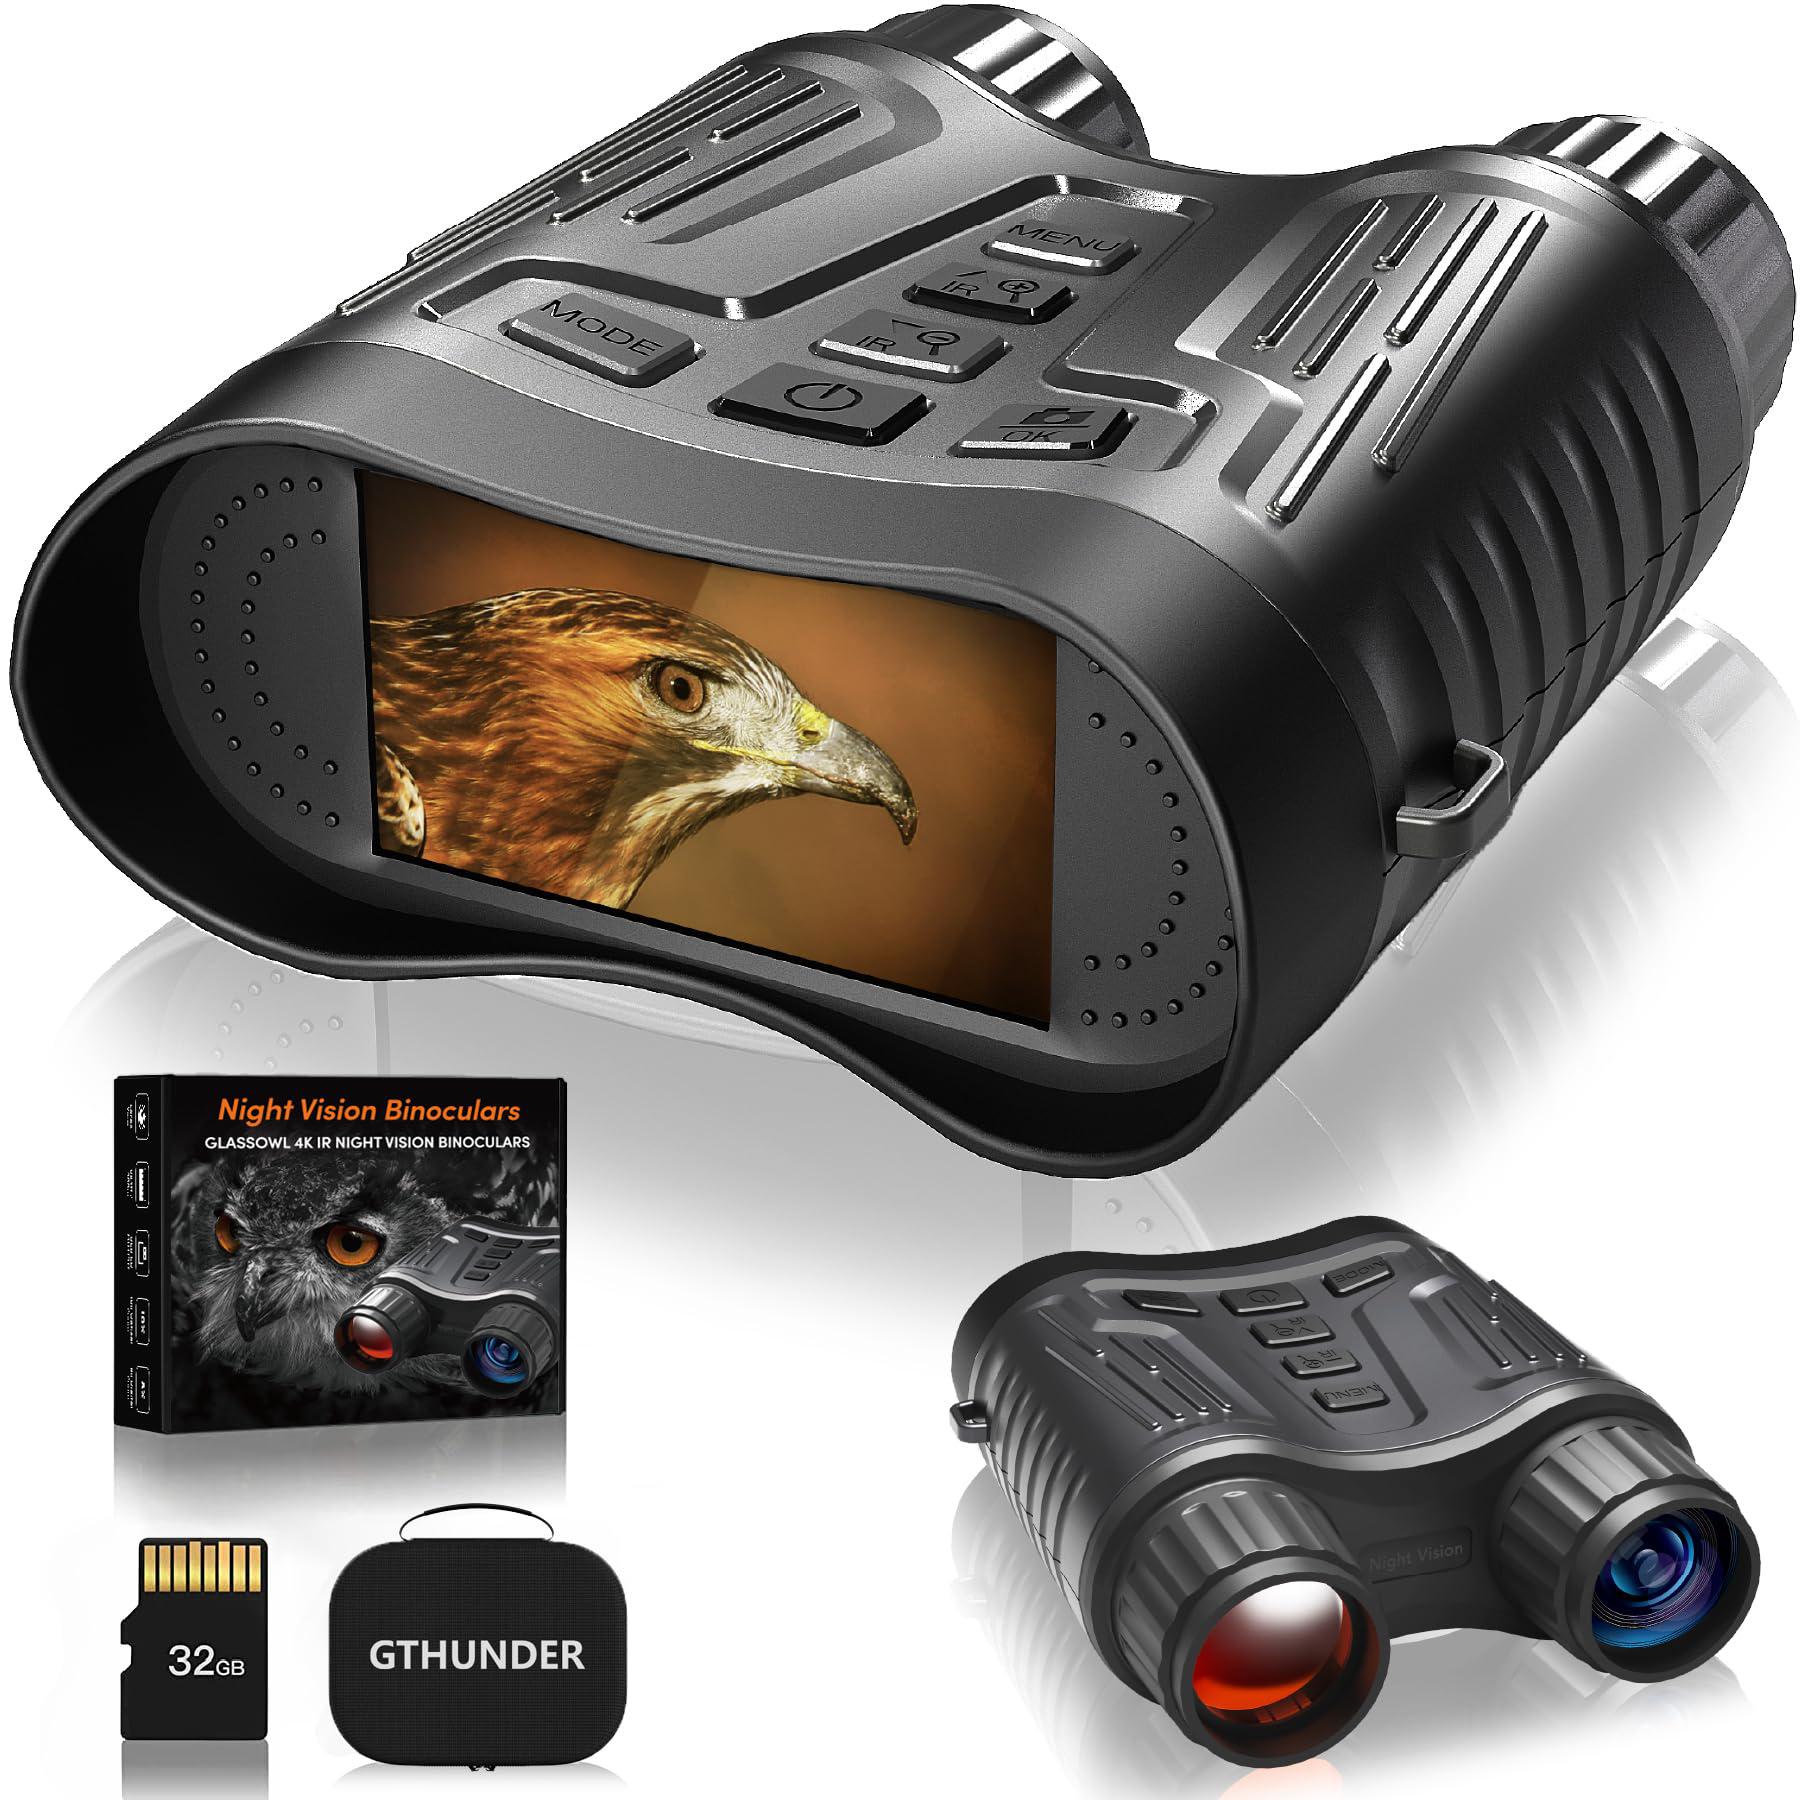 gthunder night vision binoculars - 4k rechargeable infrared digital night vision goggles with distant night visible range - 3